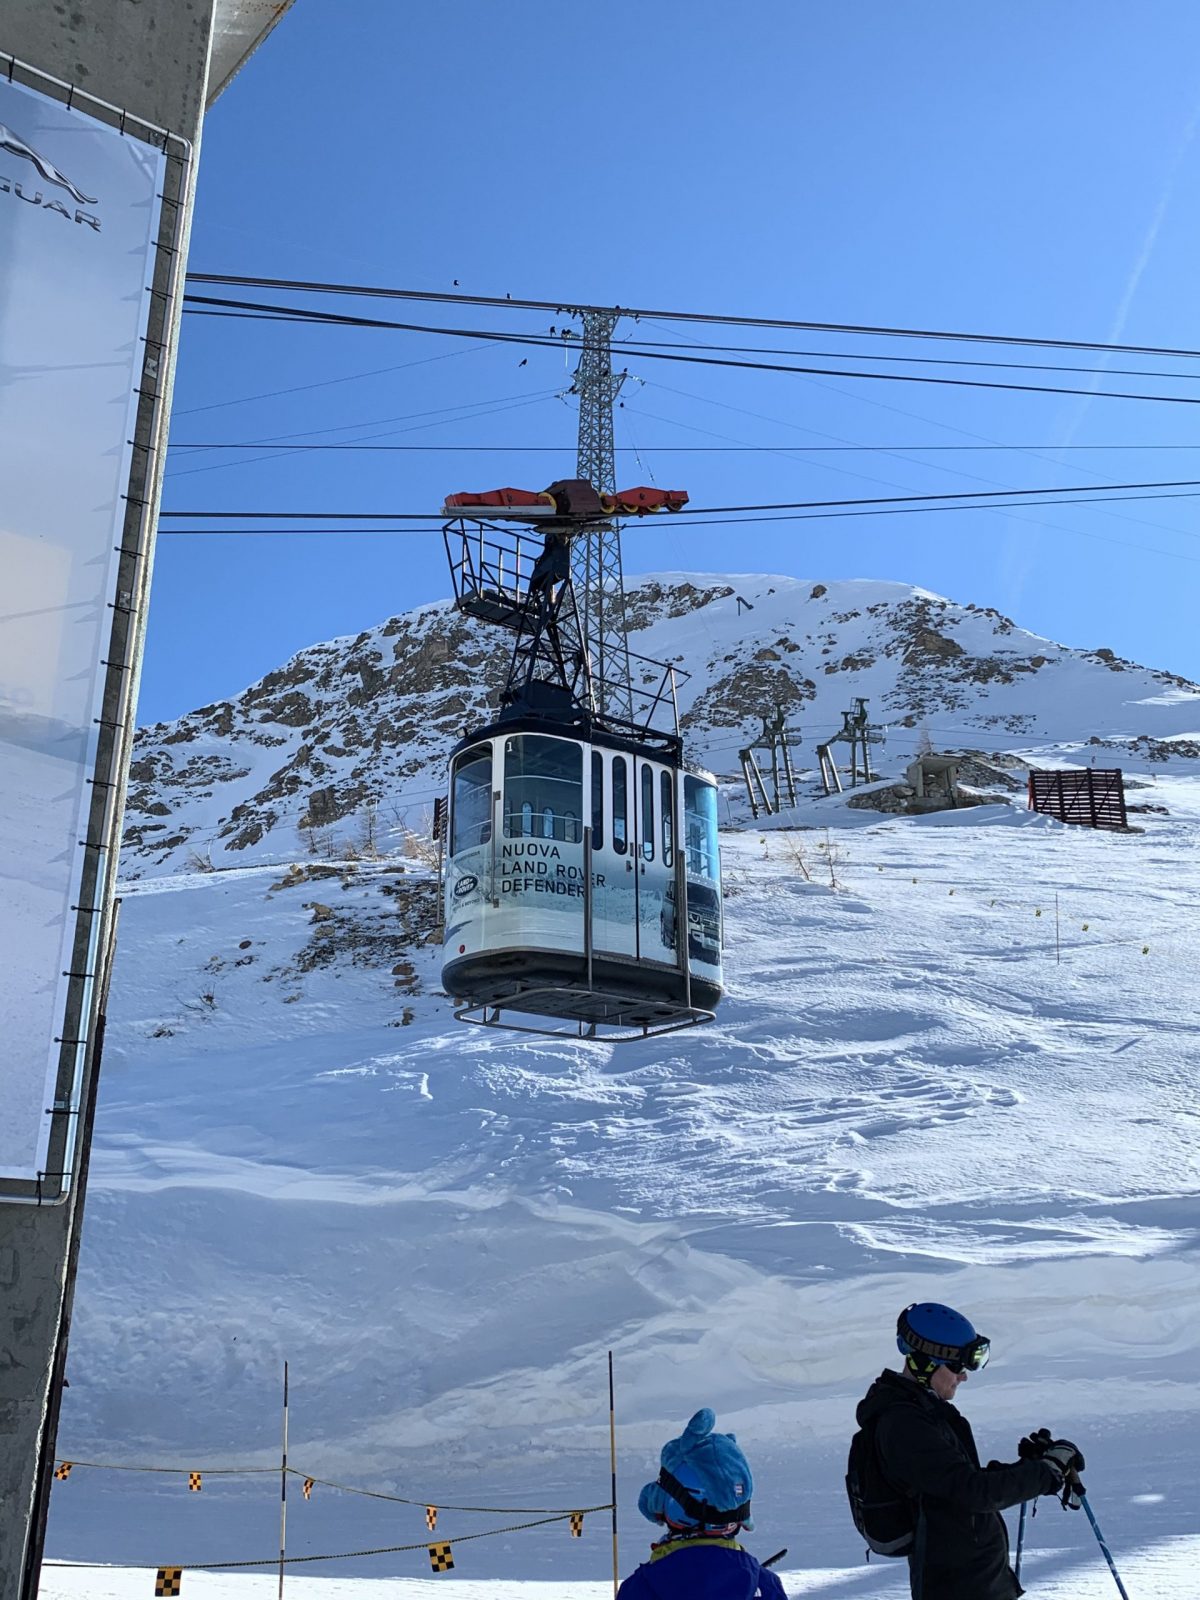 The tin can cable car of Youla. Our half term ski-safari holiday based in the Valdigne of Aosta Valley- Courmayeur, Pila and La Thuile.